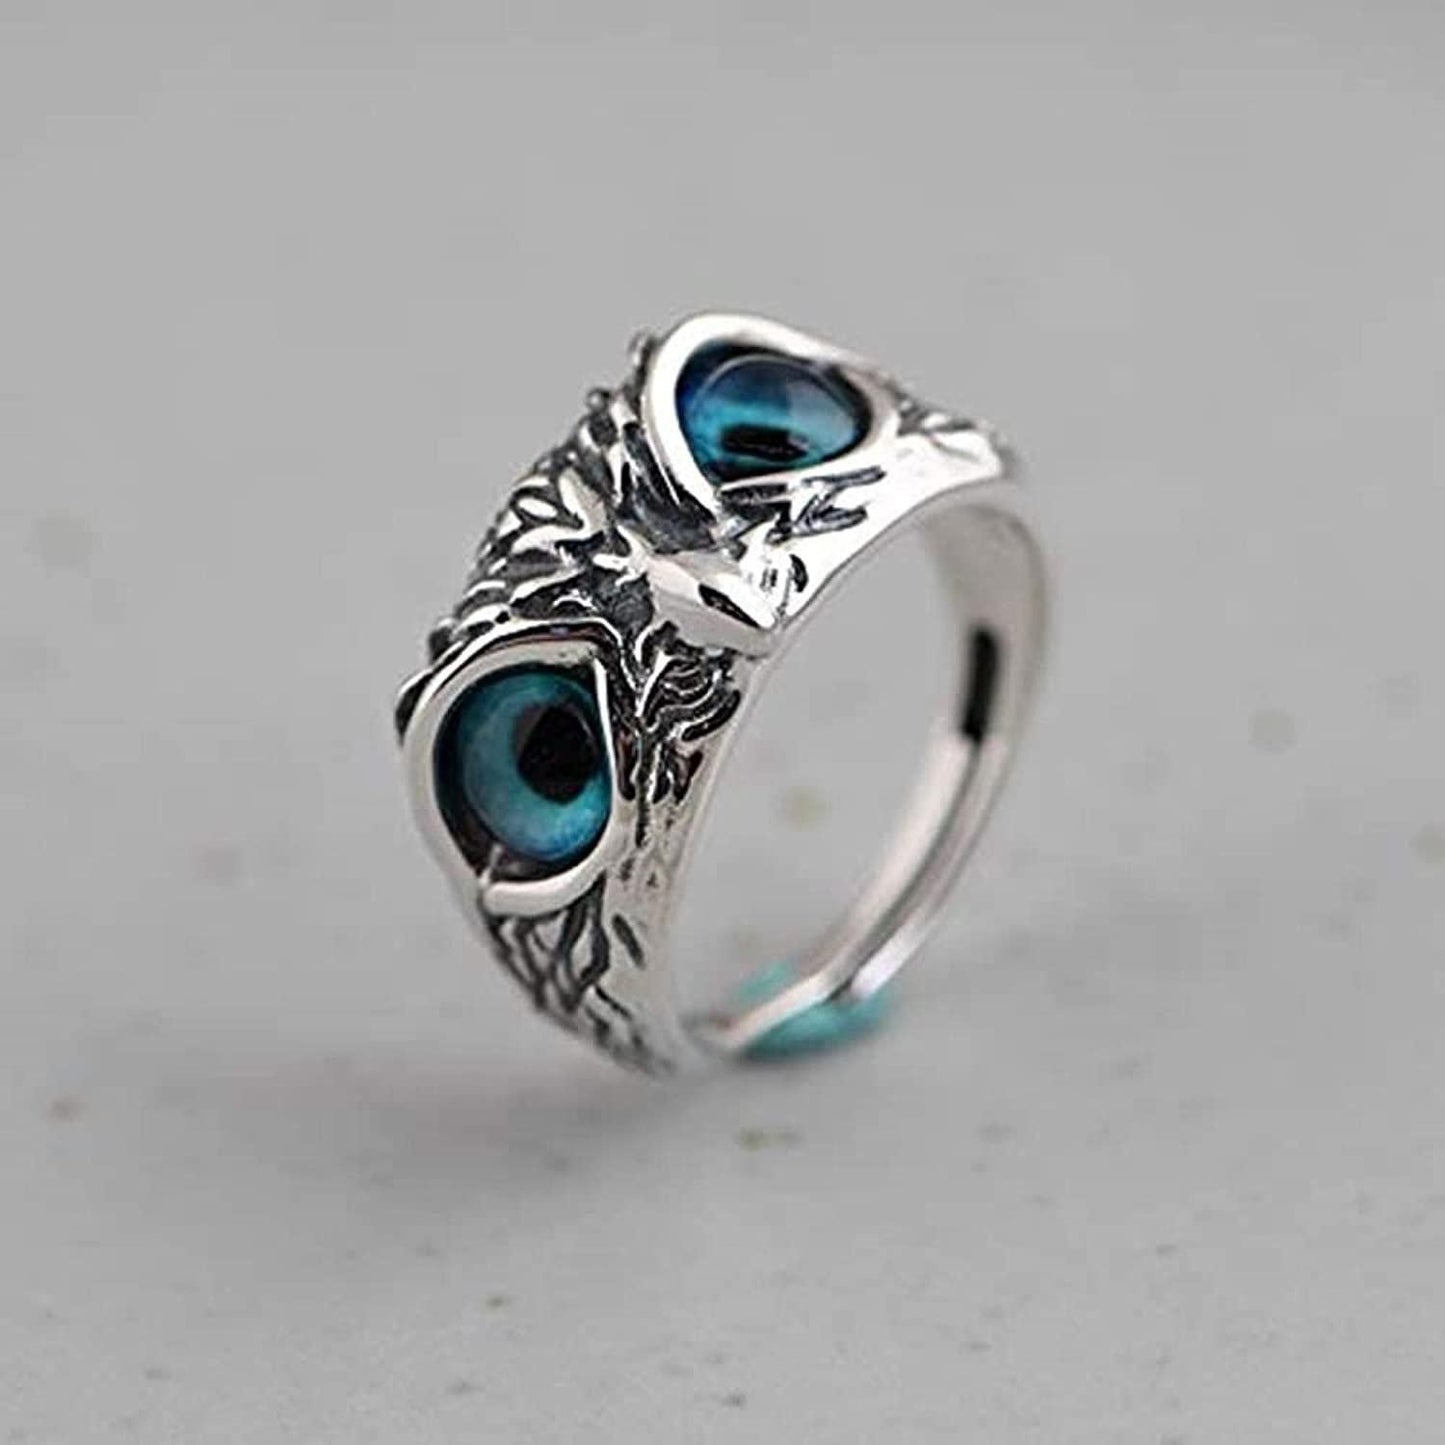 Owl Eye Ring for Men (Adjustable) Stainless Steel Silver Plated Ring